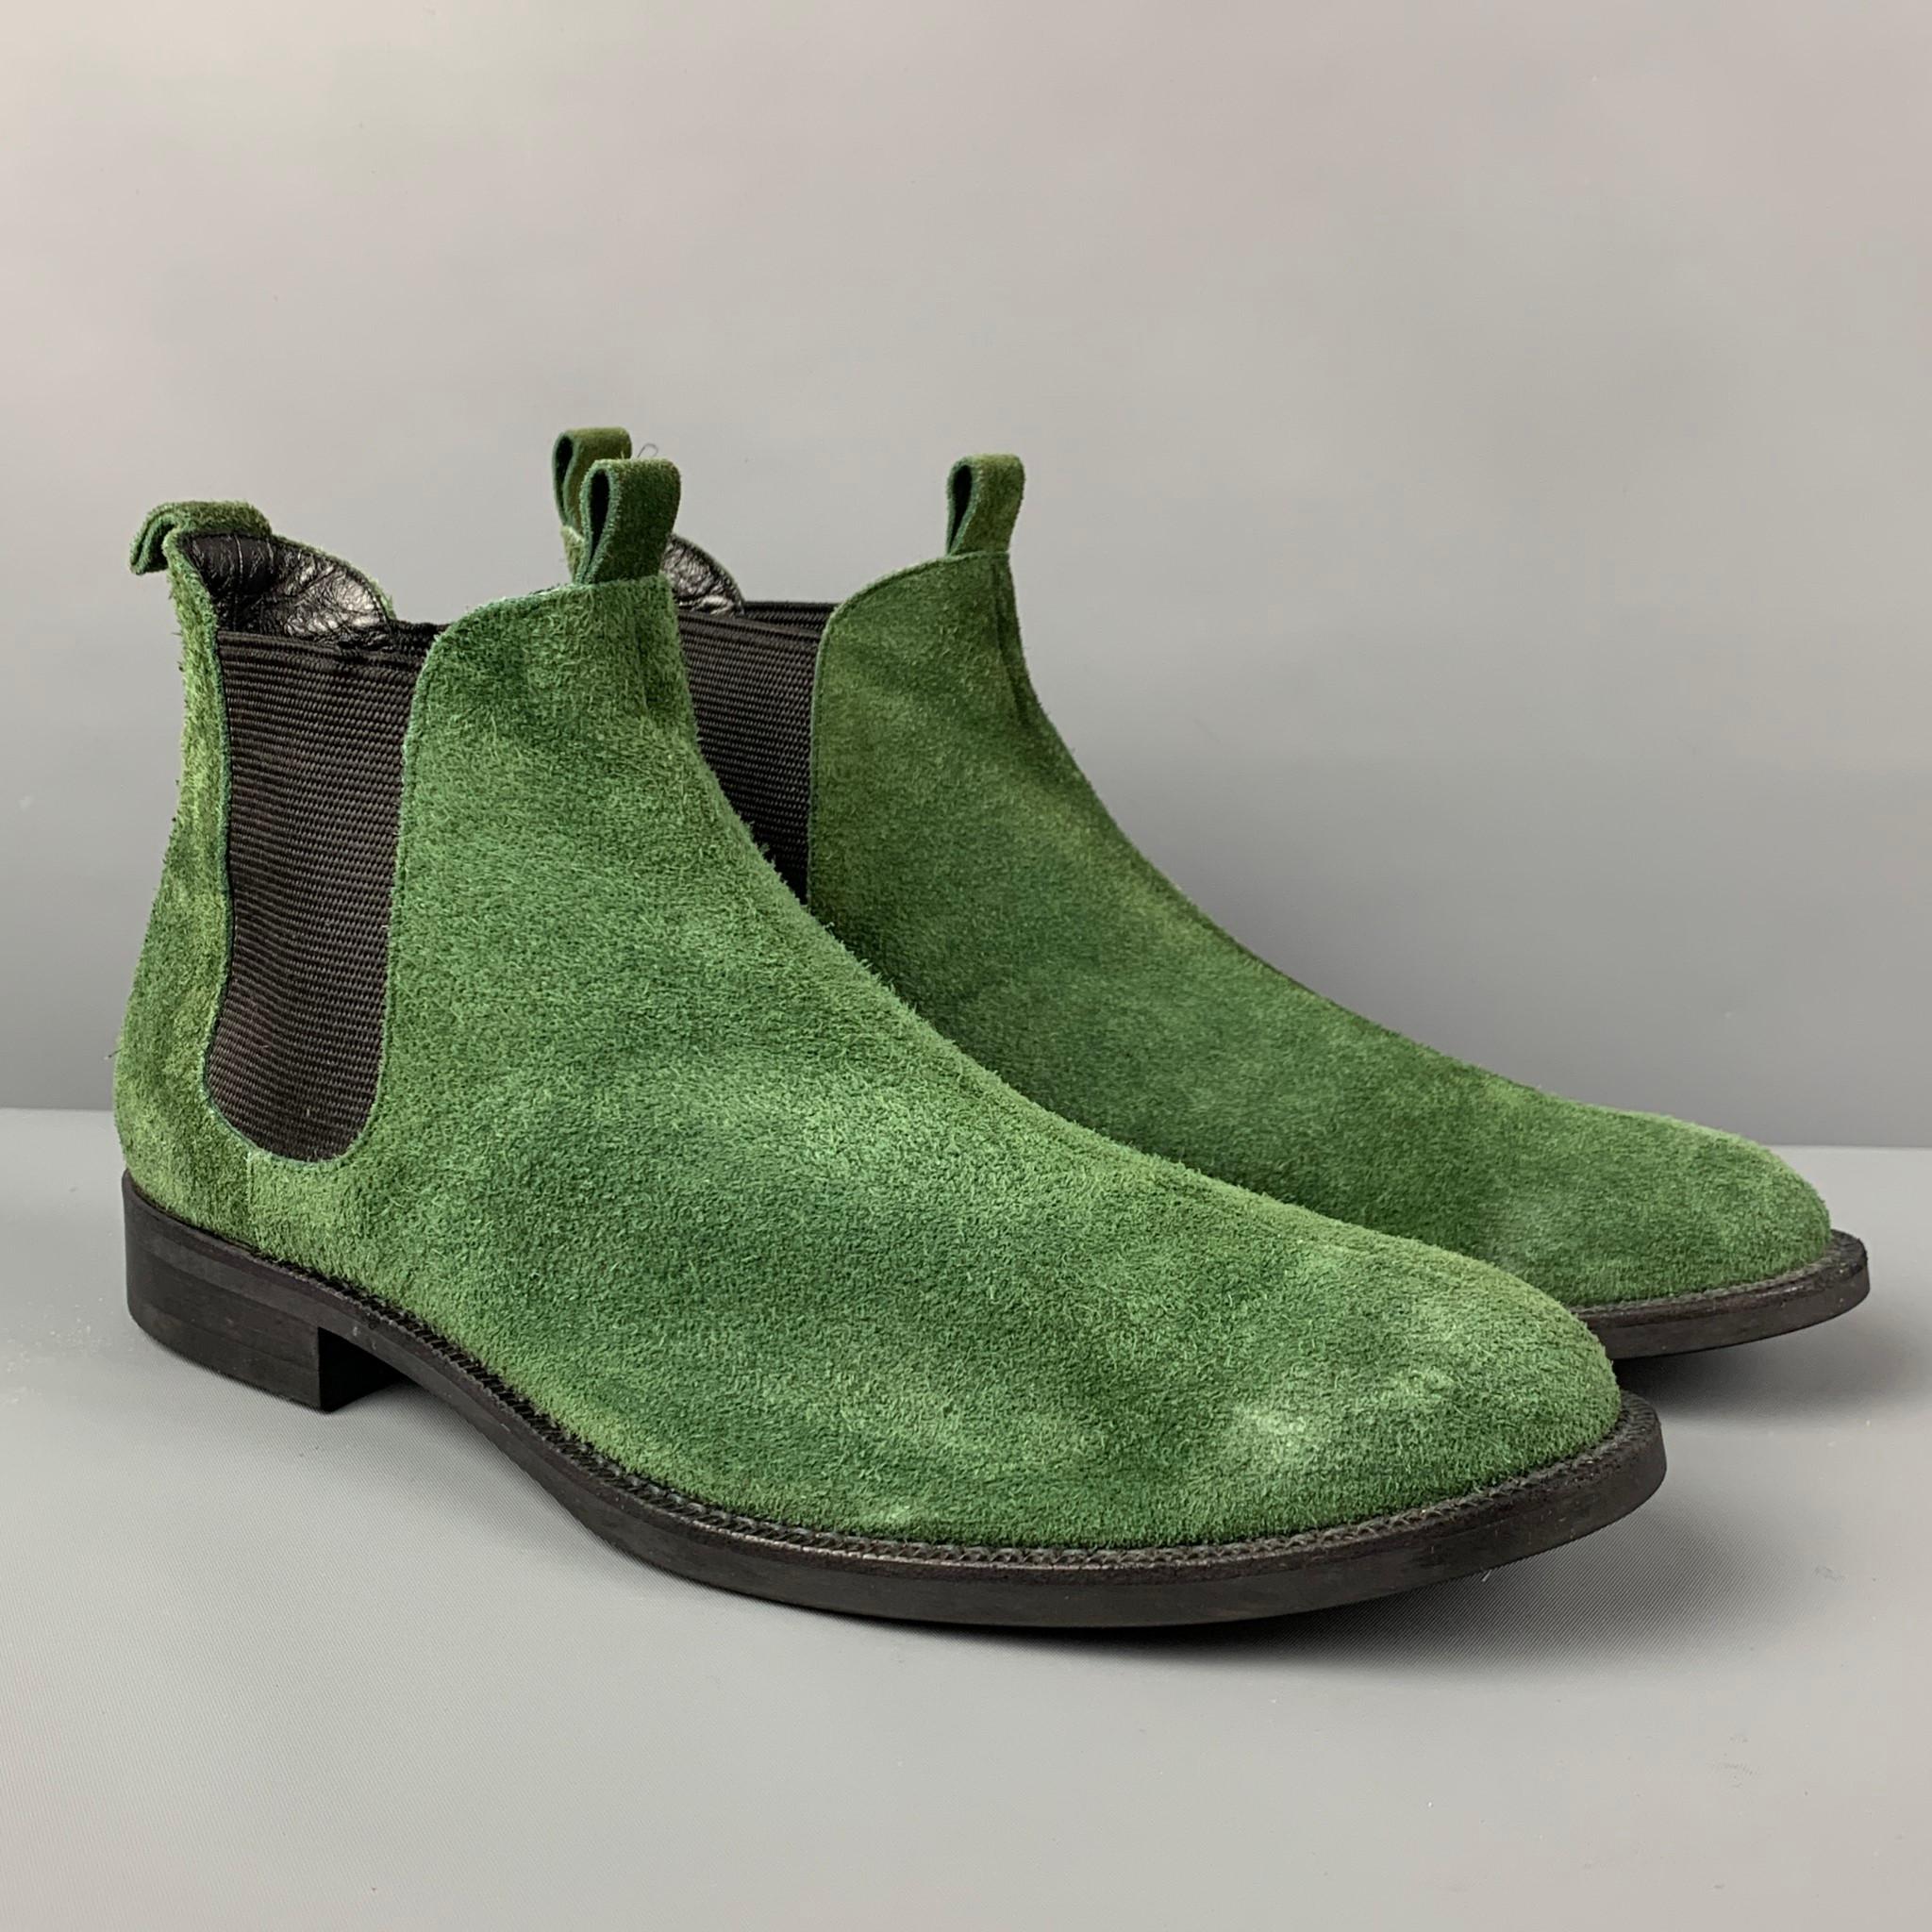 COMME des GARCONS HOMME PLUS boots comes in a green suede featuring a chelsea style, round toe, and a rubber sole. Made in Japan. 

Good Pre-Owned Condition. Moderate wear. As-Is.
Marked: 27

Measurements:

Length: 12 in.
Width: 4.25 in.
Height: 5